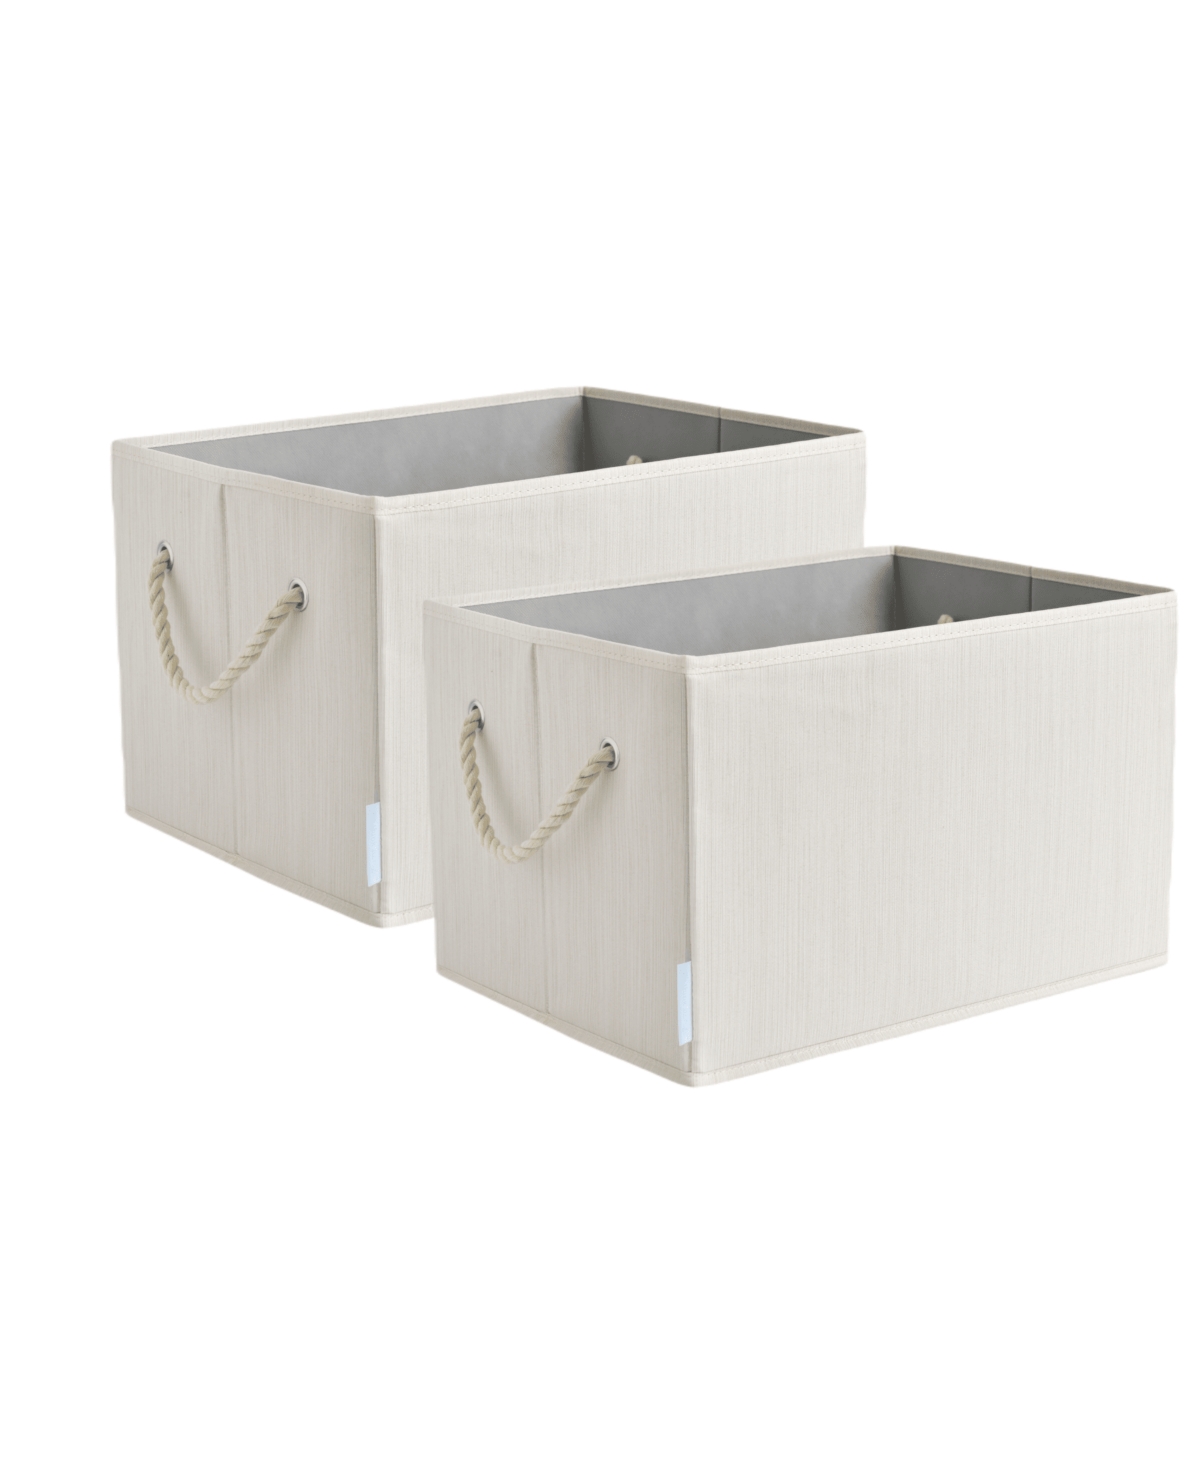 Wethinkstorage 34 Litre Collapsible Fabric Storage Bins With Cotton Rope Handles, Set Of 2 In Ivory